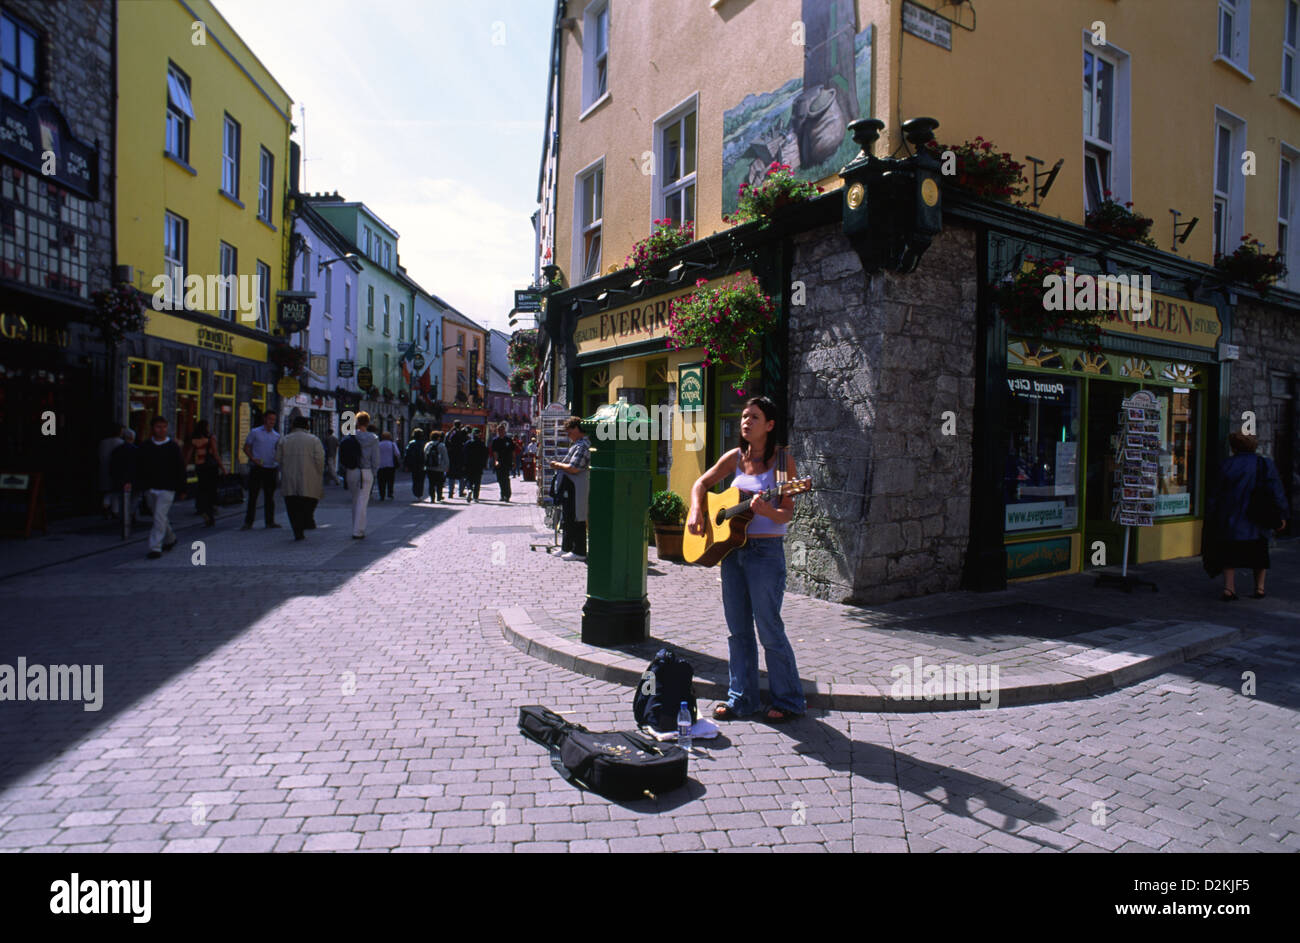 Brightly-painted buildings in the centre of the town of Galway, Co. Galway, Ireland. Stock Photo